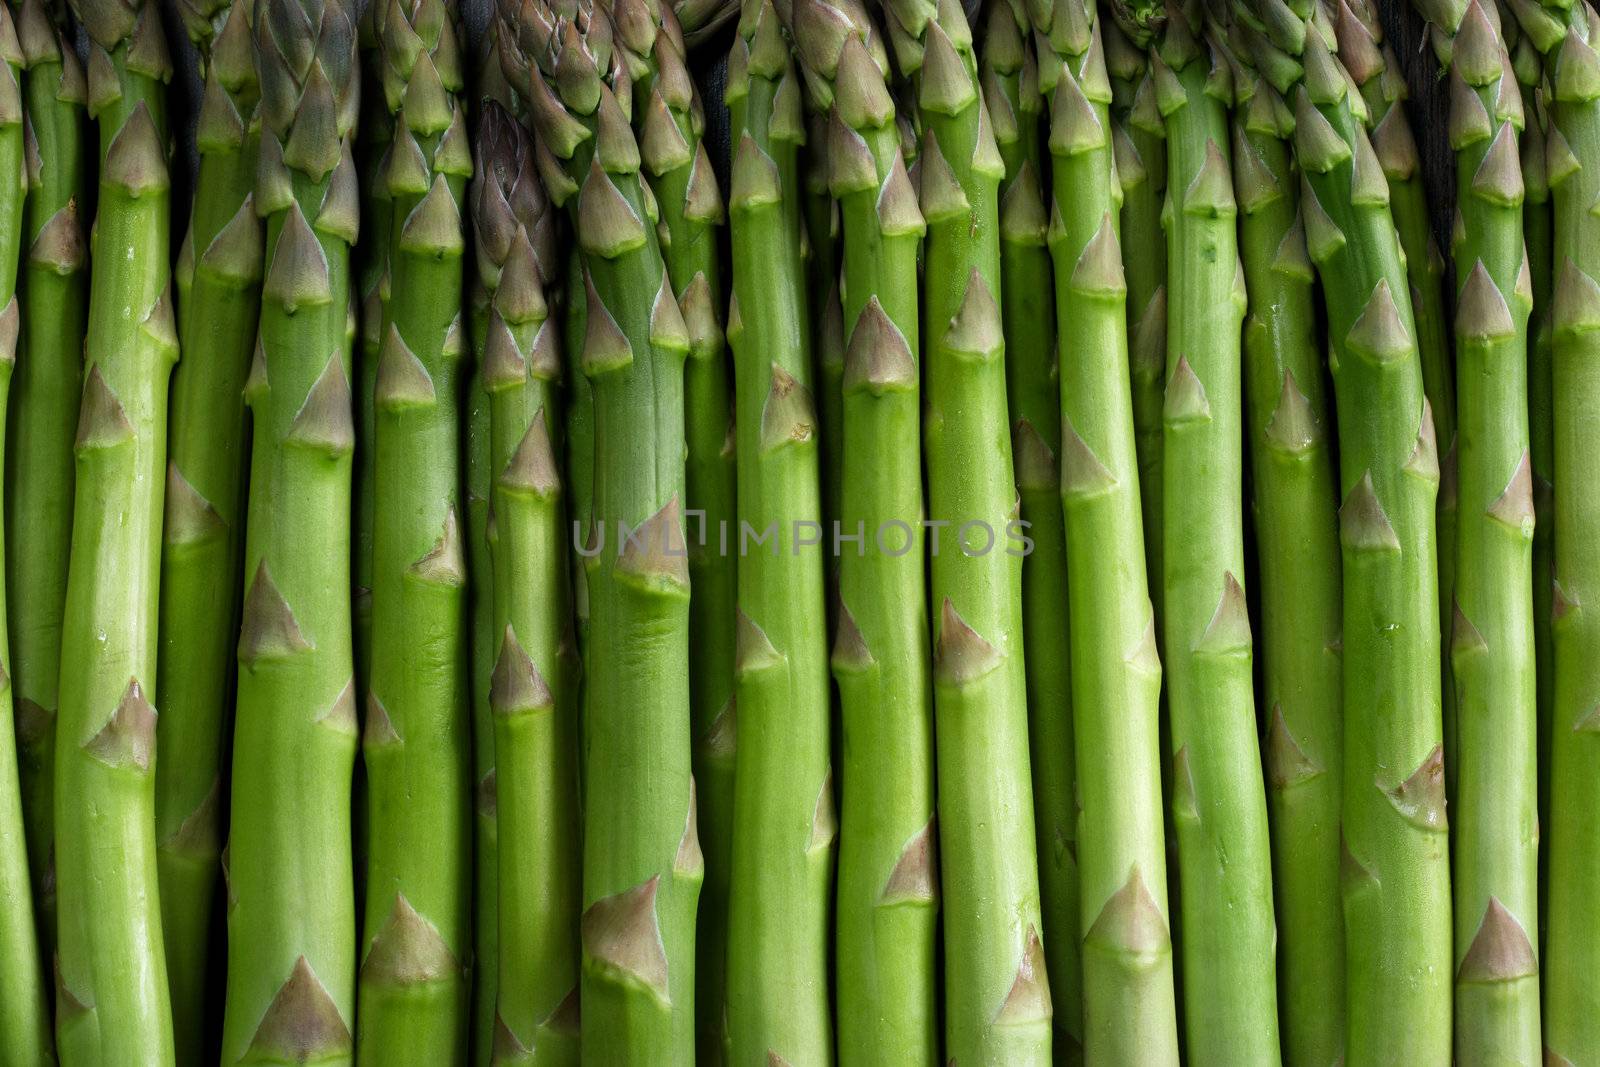 Asparagus background by sumners